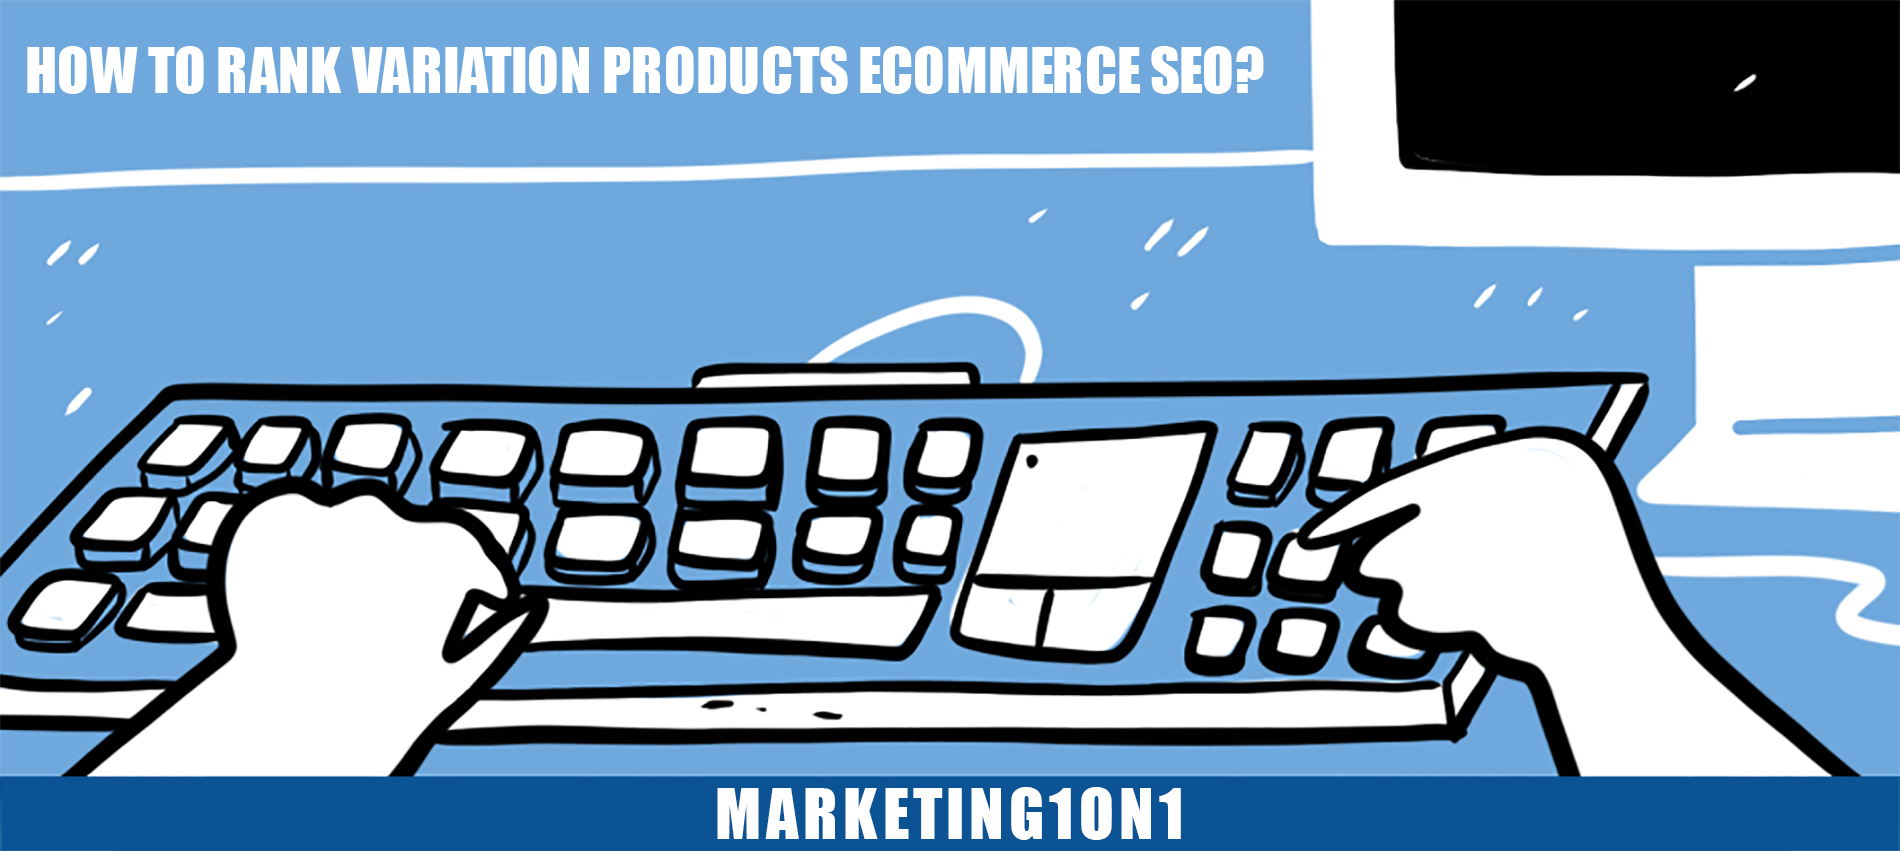 How to rank variation products eCommerce SEO?